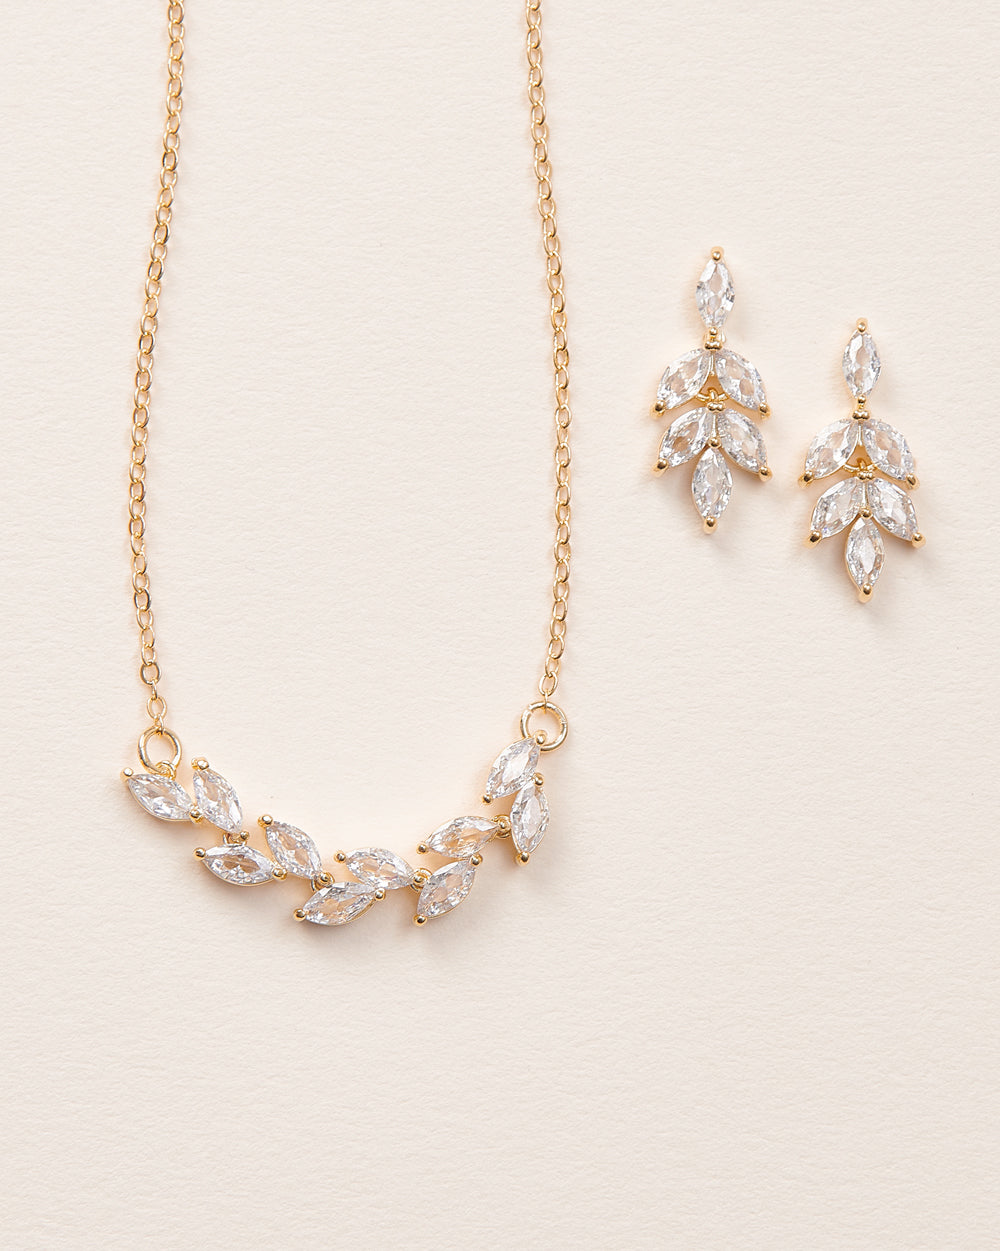 Allure Wedding Jewelry: Bridesmaid Earrings and Jewelry Sets